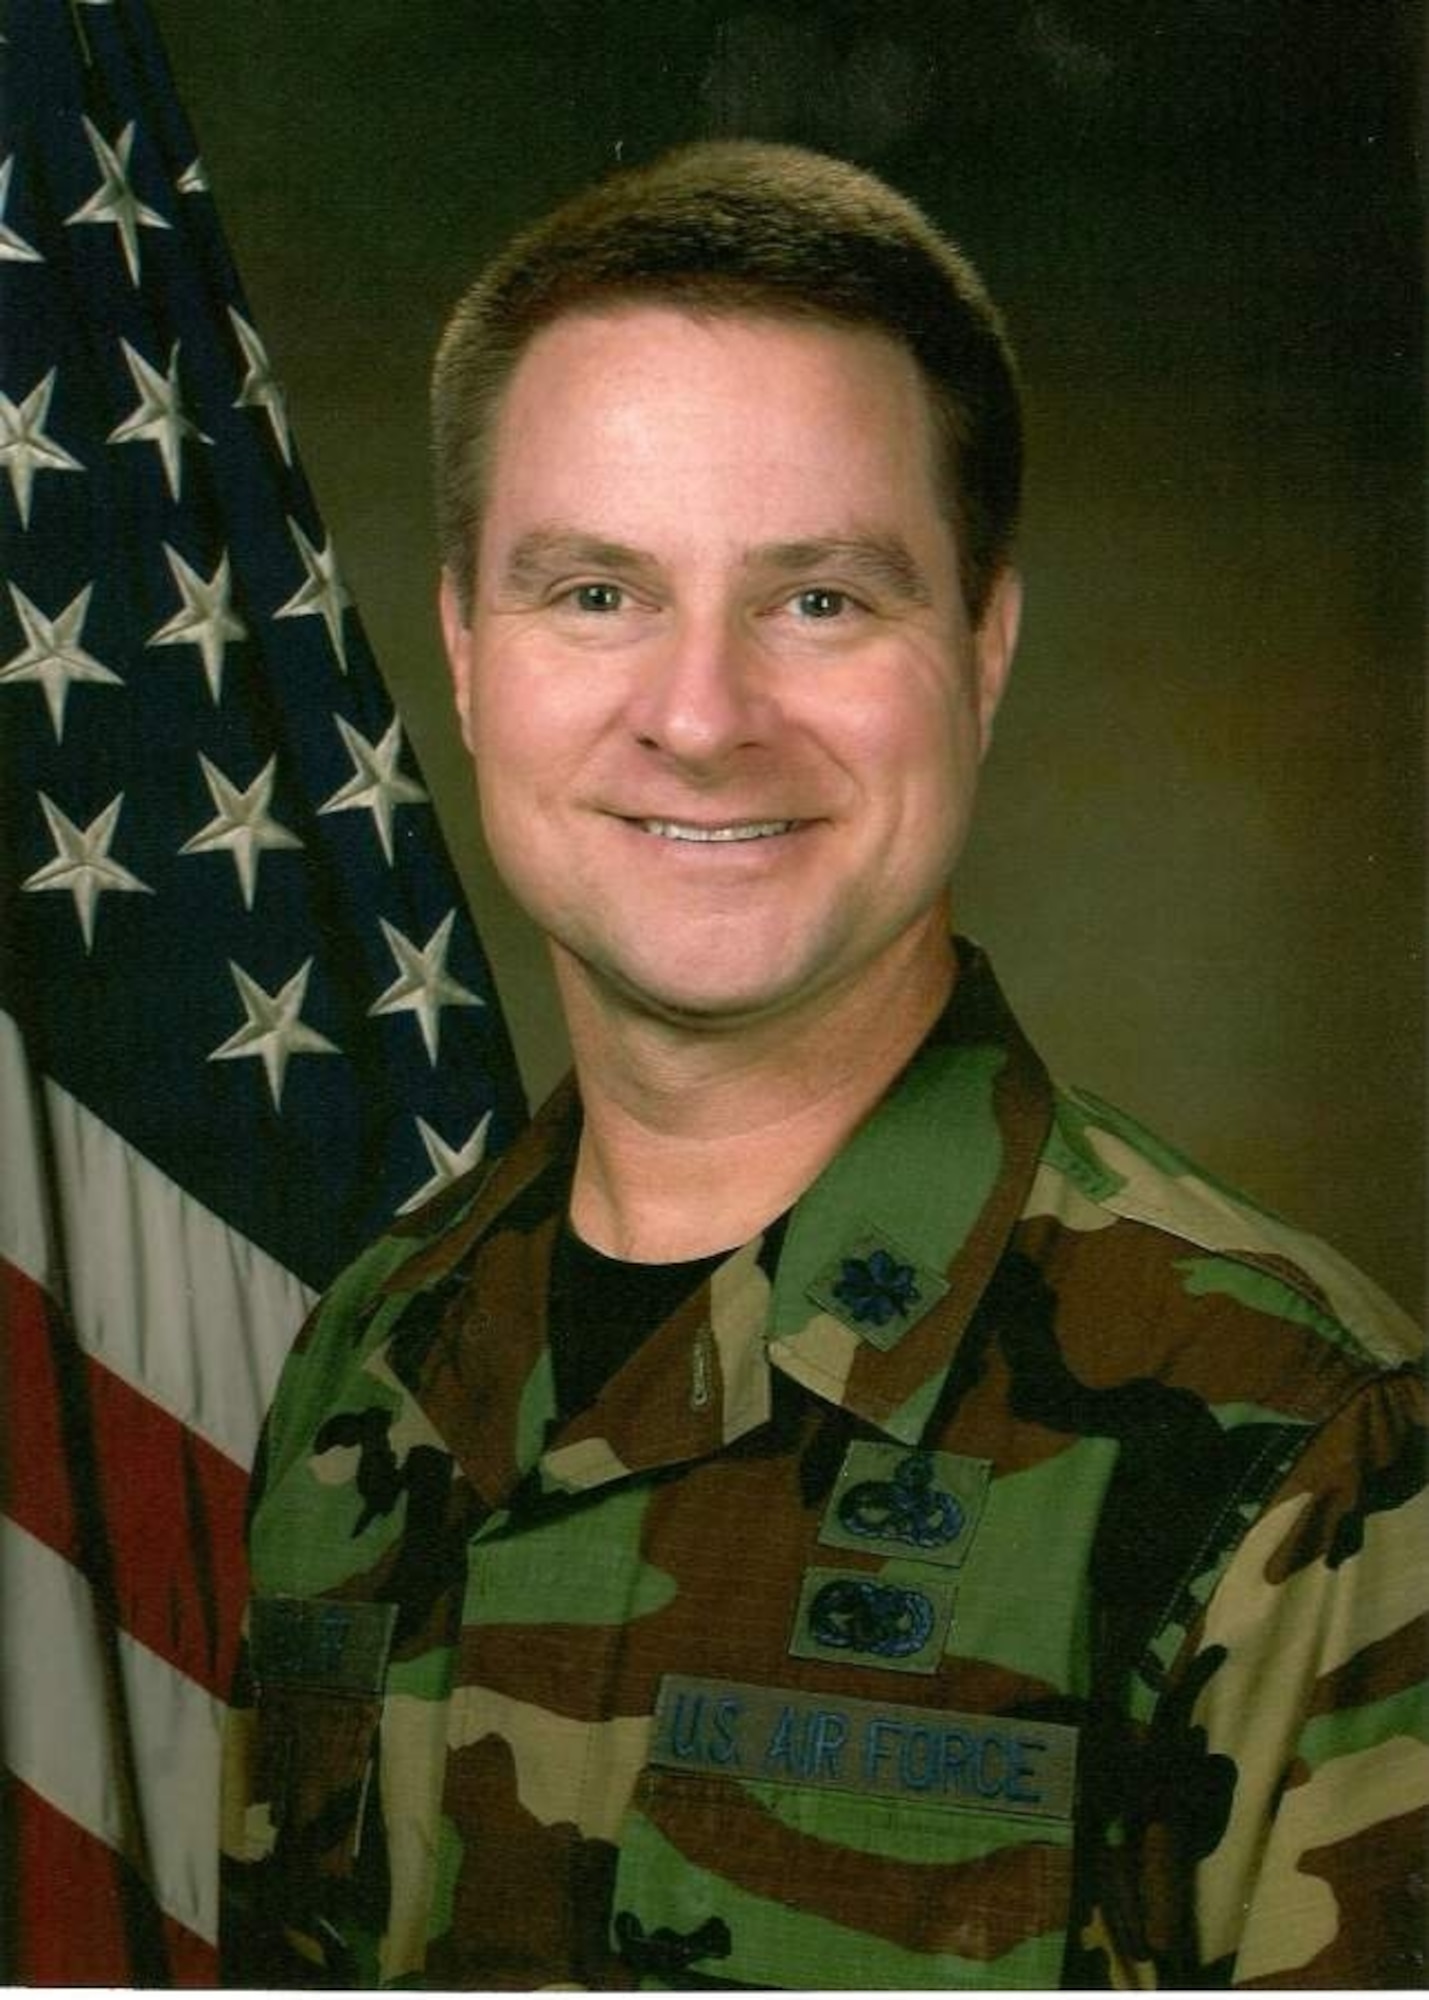 Lt Col Raymond Roessler, with the 309th Maintenance Wing, was killed after his civilian aircraft crashed on Oct. 5 in San Bernadino, Calif.  